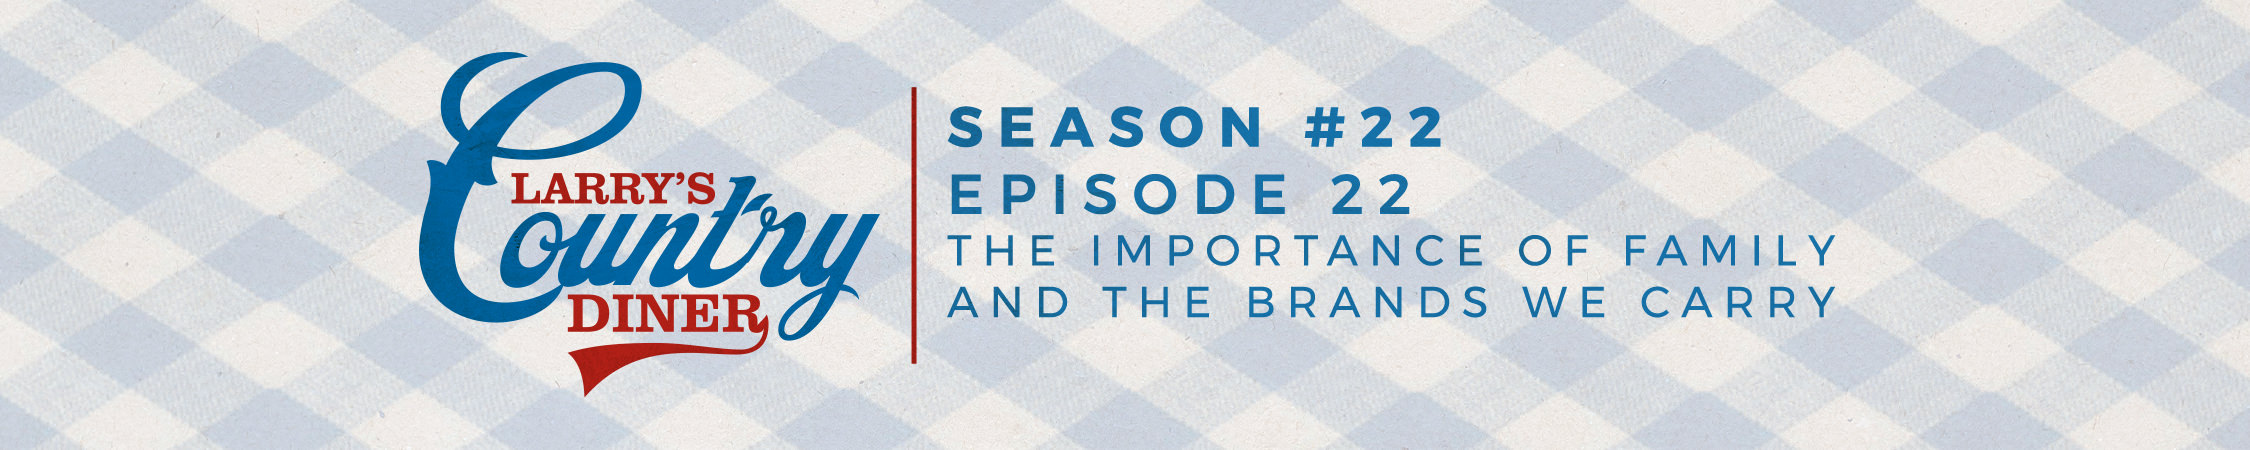 The Importance of Family and the Brands We Carry (S22:E22) Banner